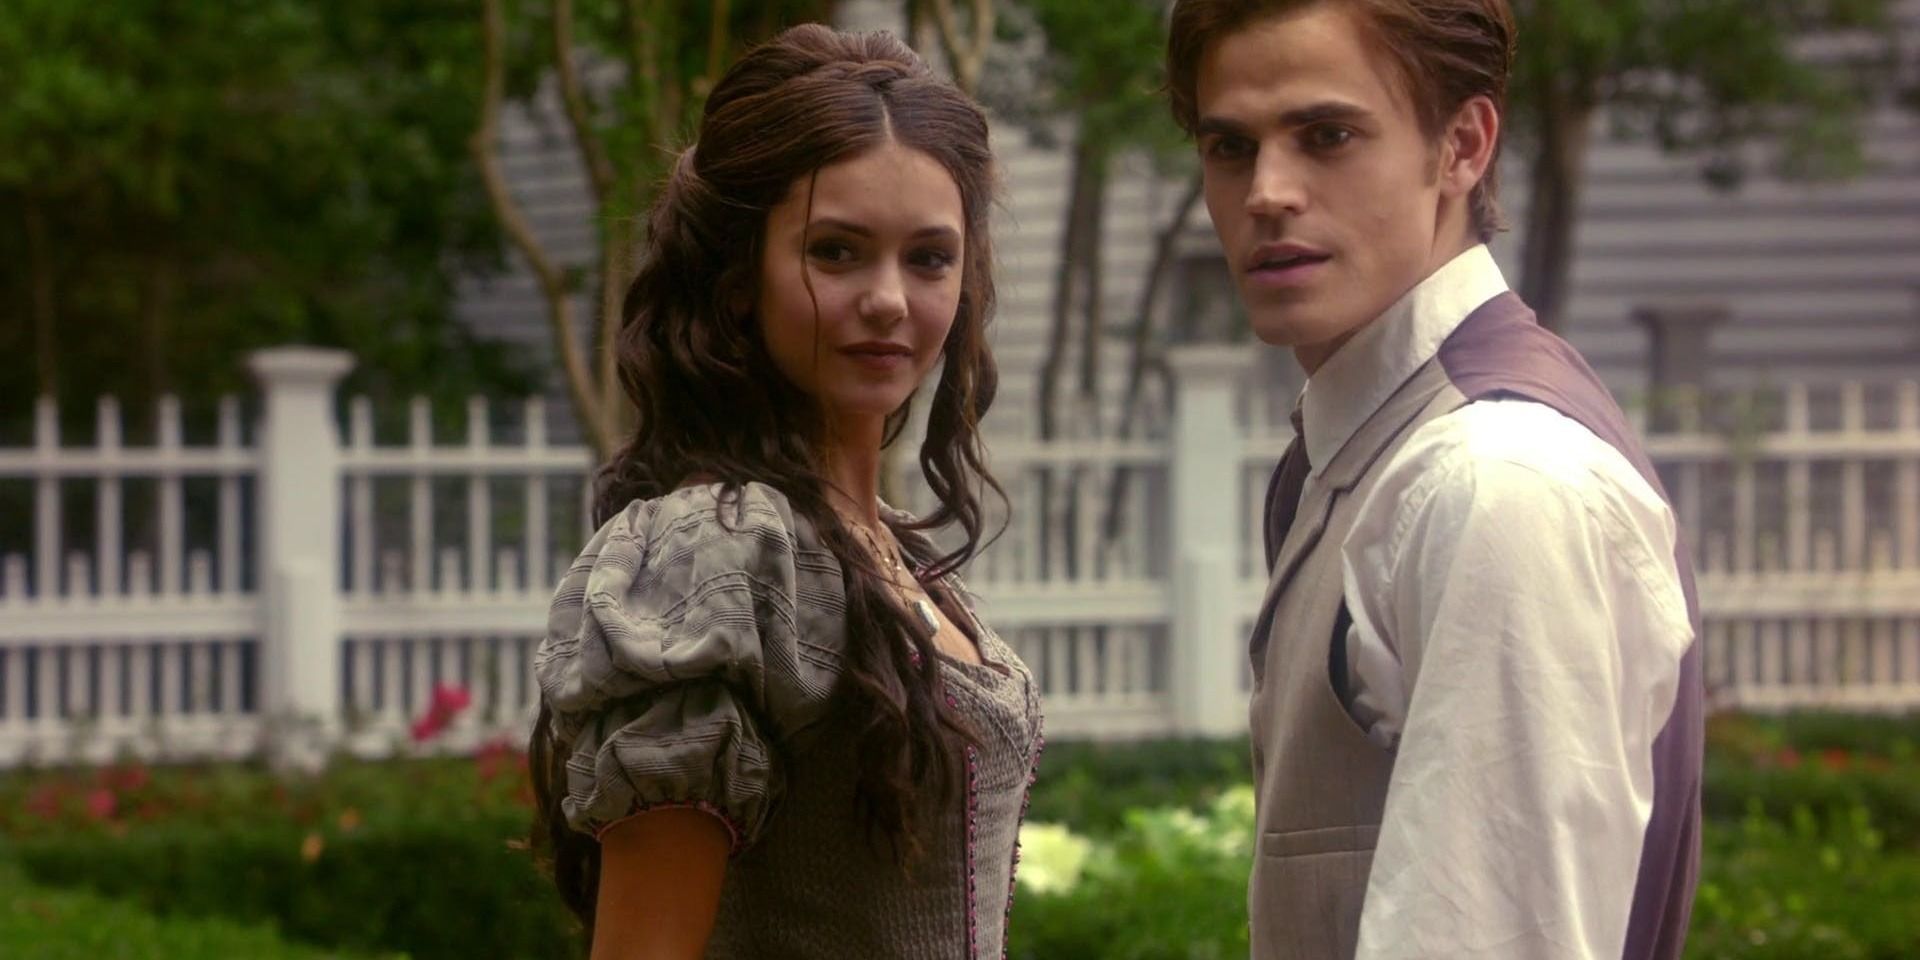 Stefan and Katherine standing together in Mystic Falls in The Vampire Diaries